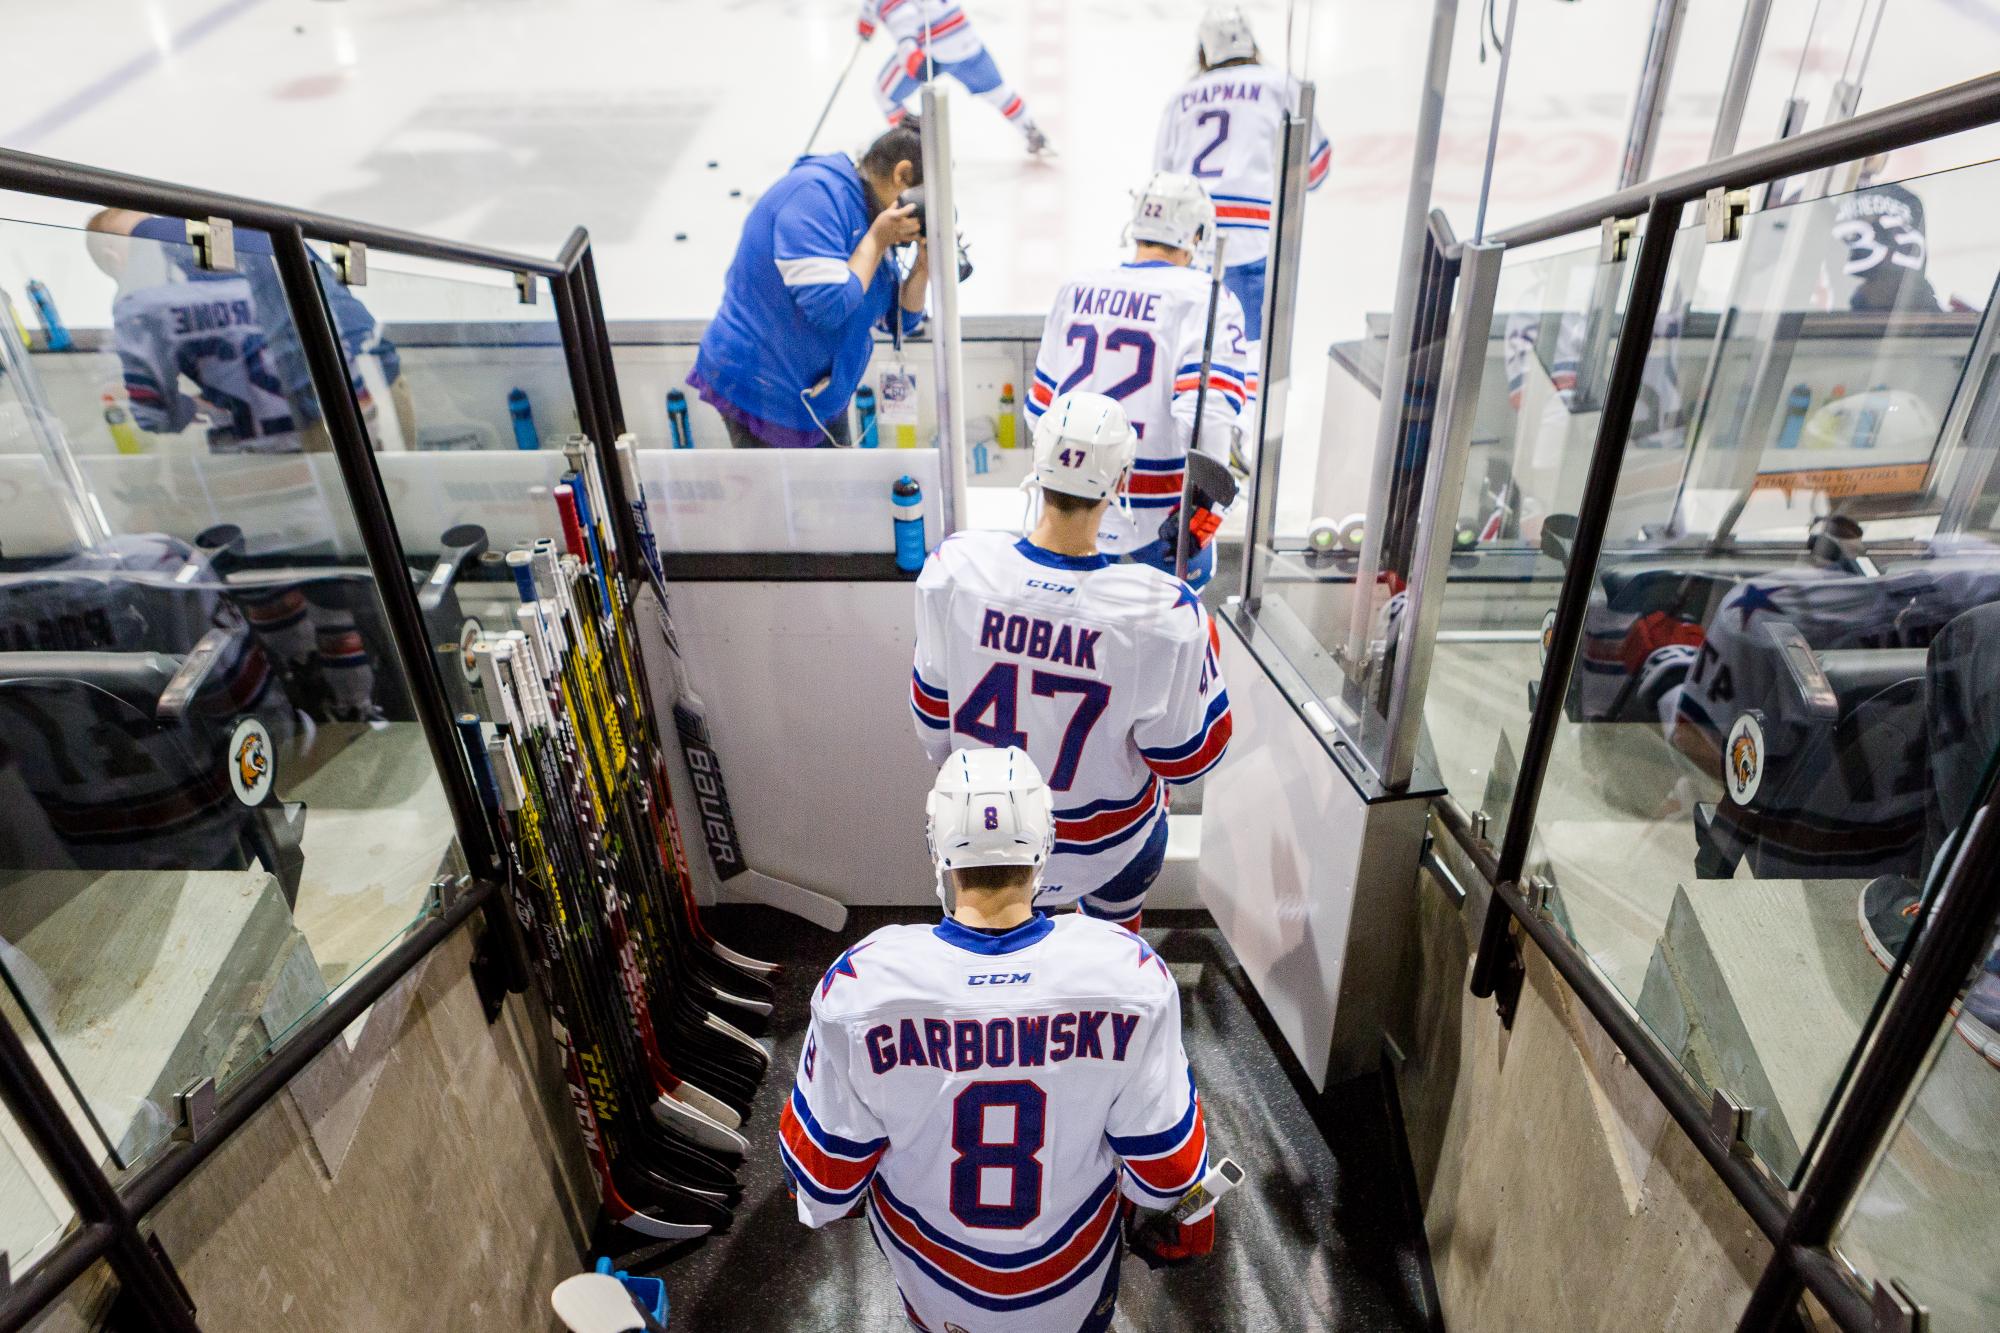 Matt Garbowsky enters the ice with the Rochester Americans at the Gene Polisseni Center on Oct. 1, 2015. Photograph by Rob Rauchwerger.